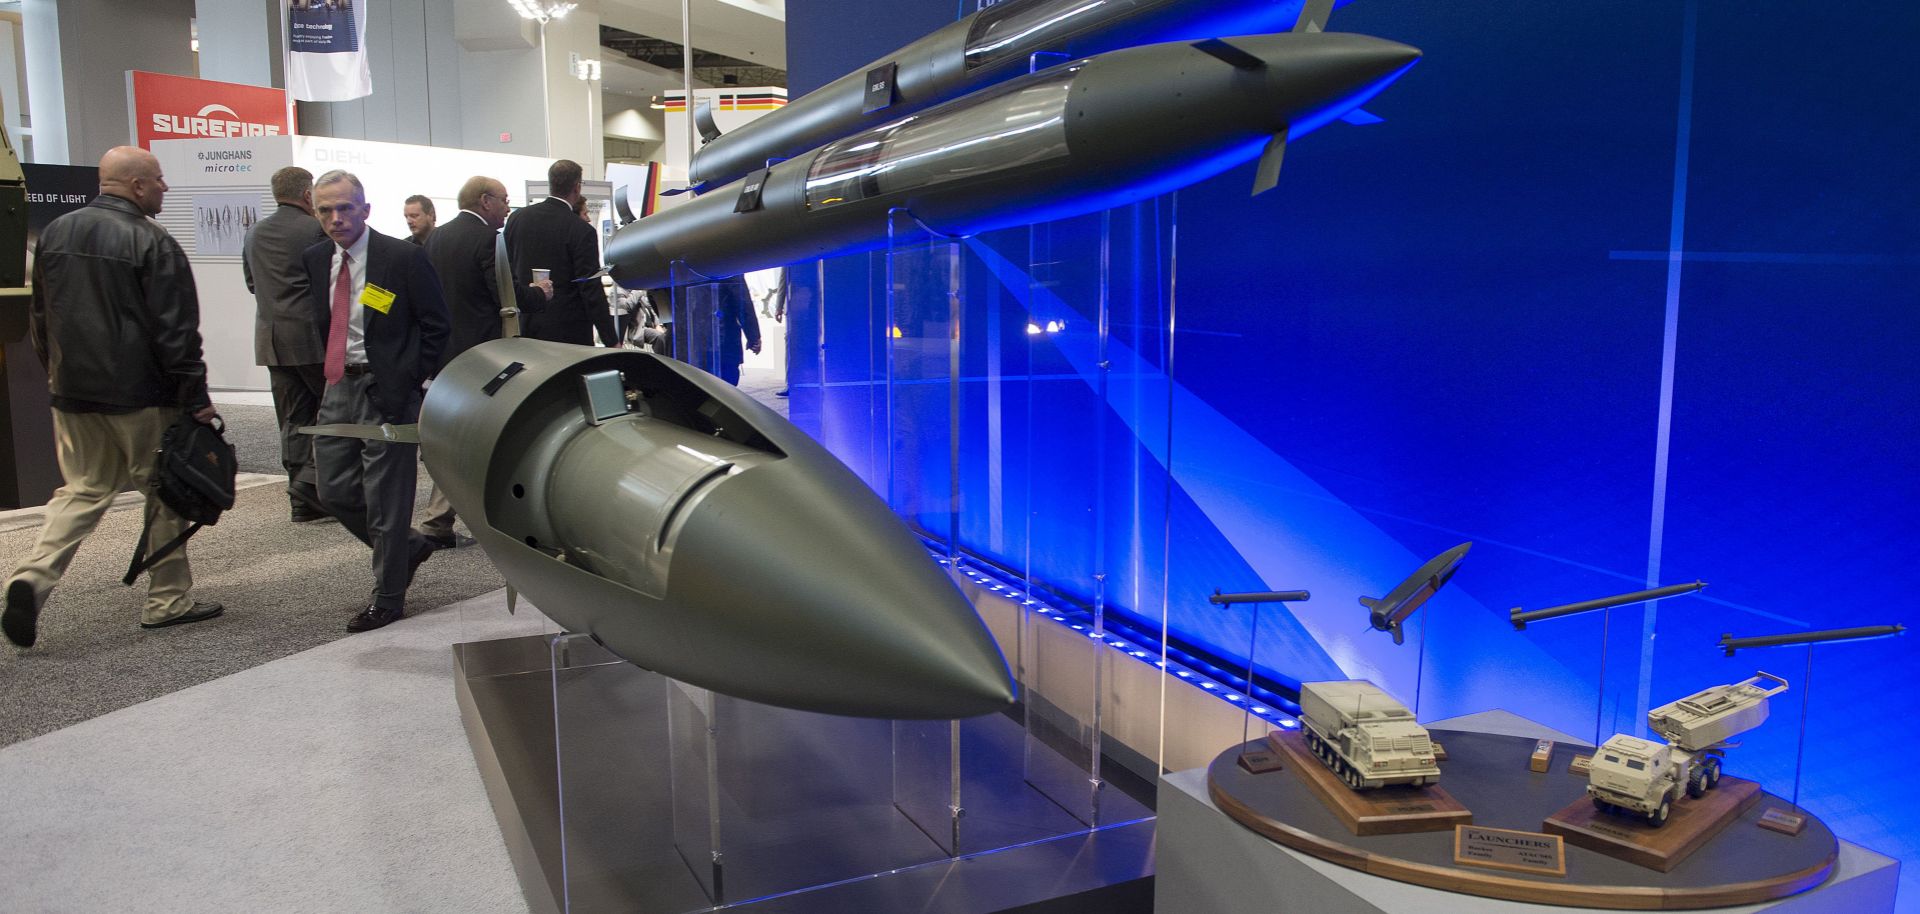 Missiles manufactured by Lockheed Martin are displayed during the Association of the United States Army's annual meeting and exposition in Washington, D.C., on Oct. 13, 2014.